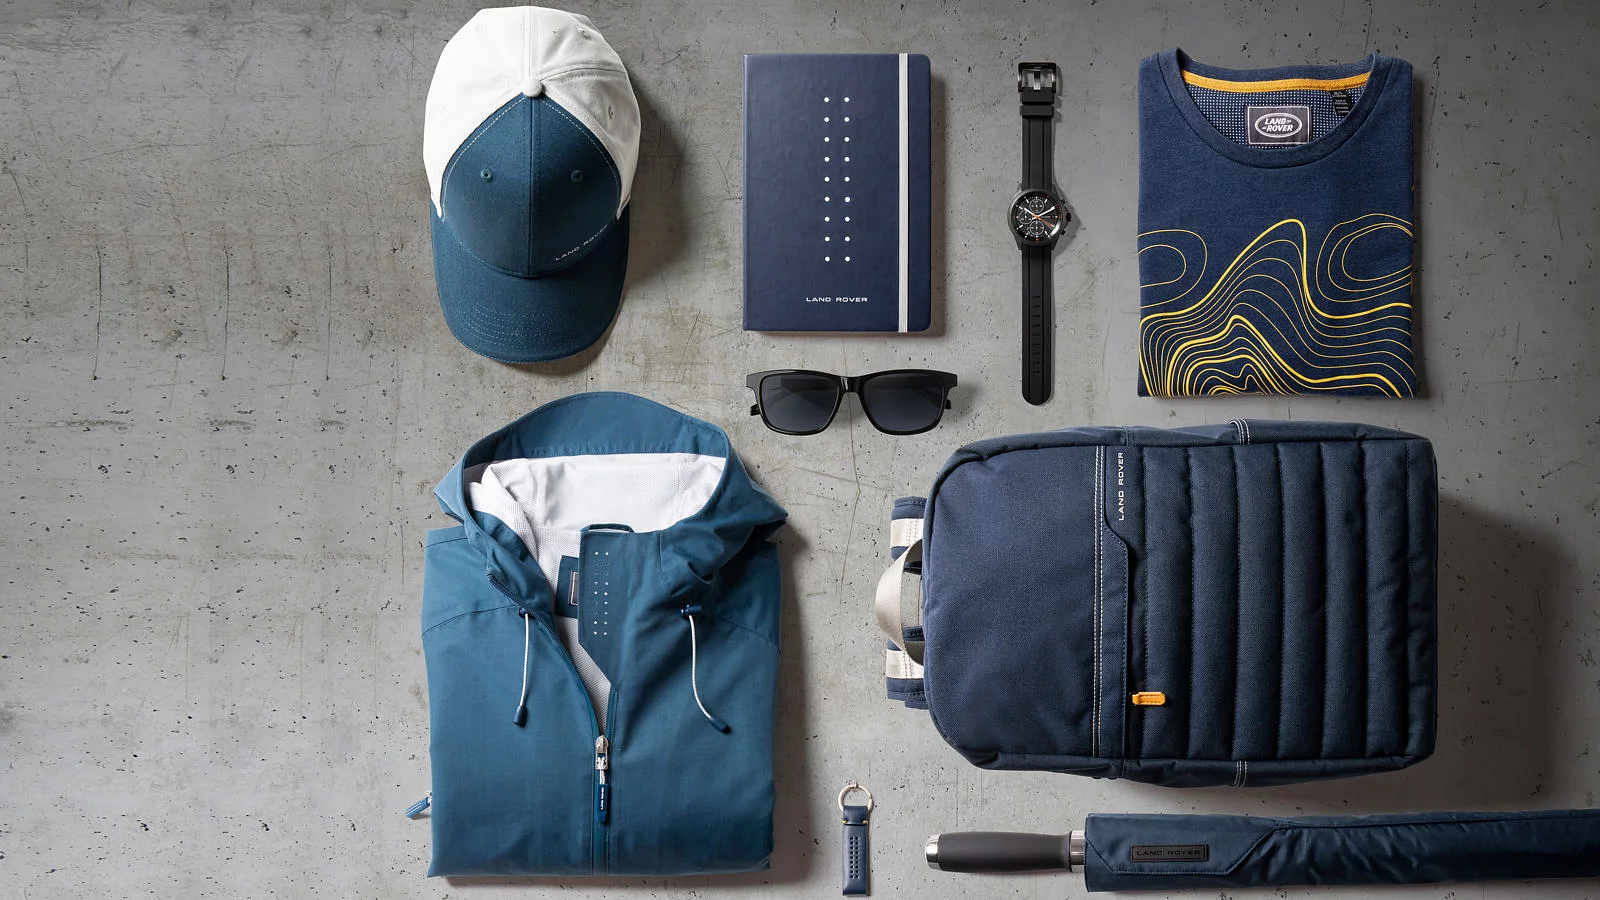 THE LAND ROVER LIFESTYLE COLLECTION